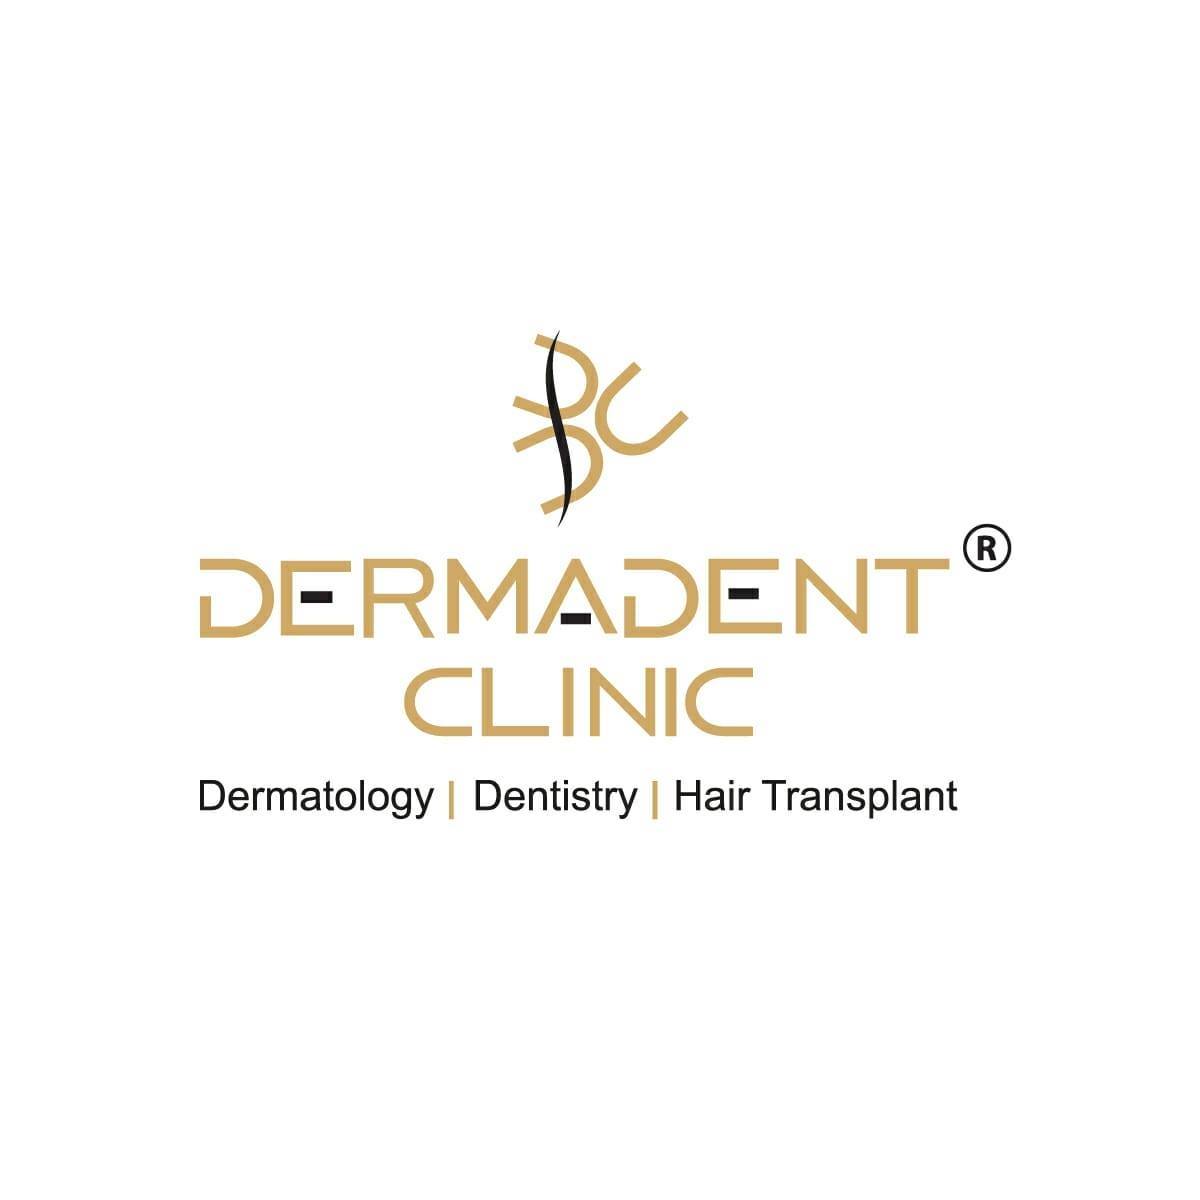 DermaDent Clinic|Veterinary|Medical Services